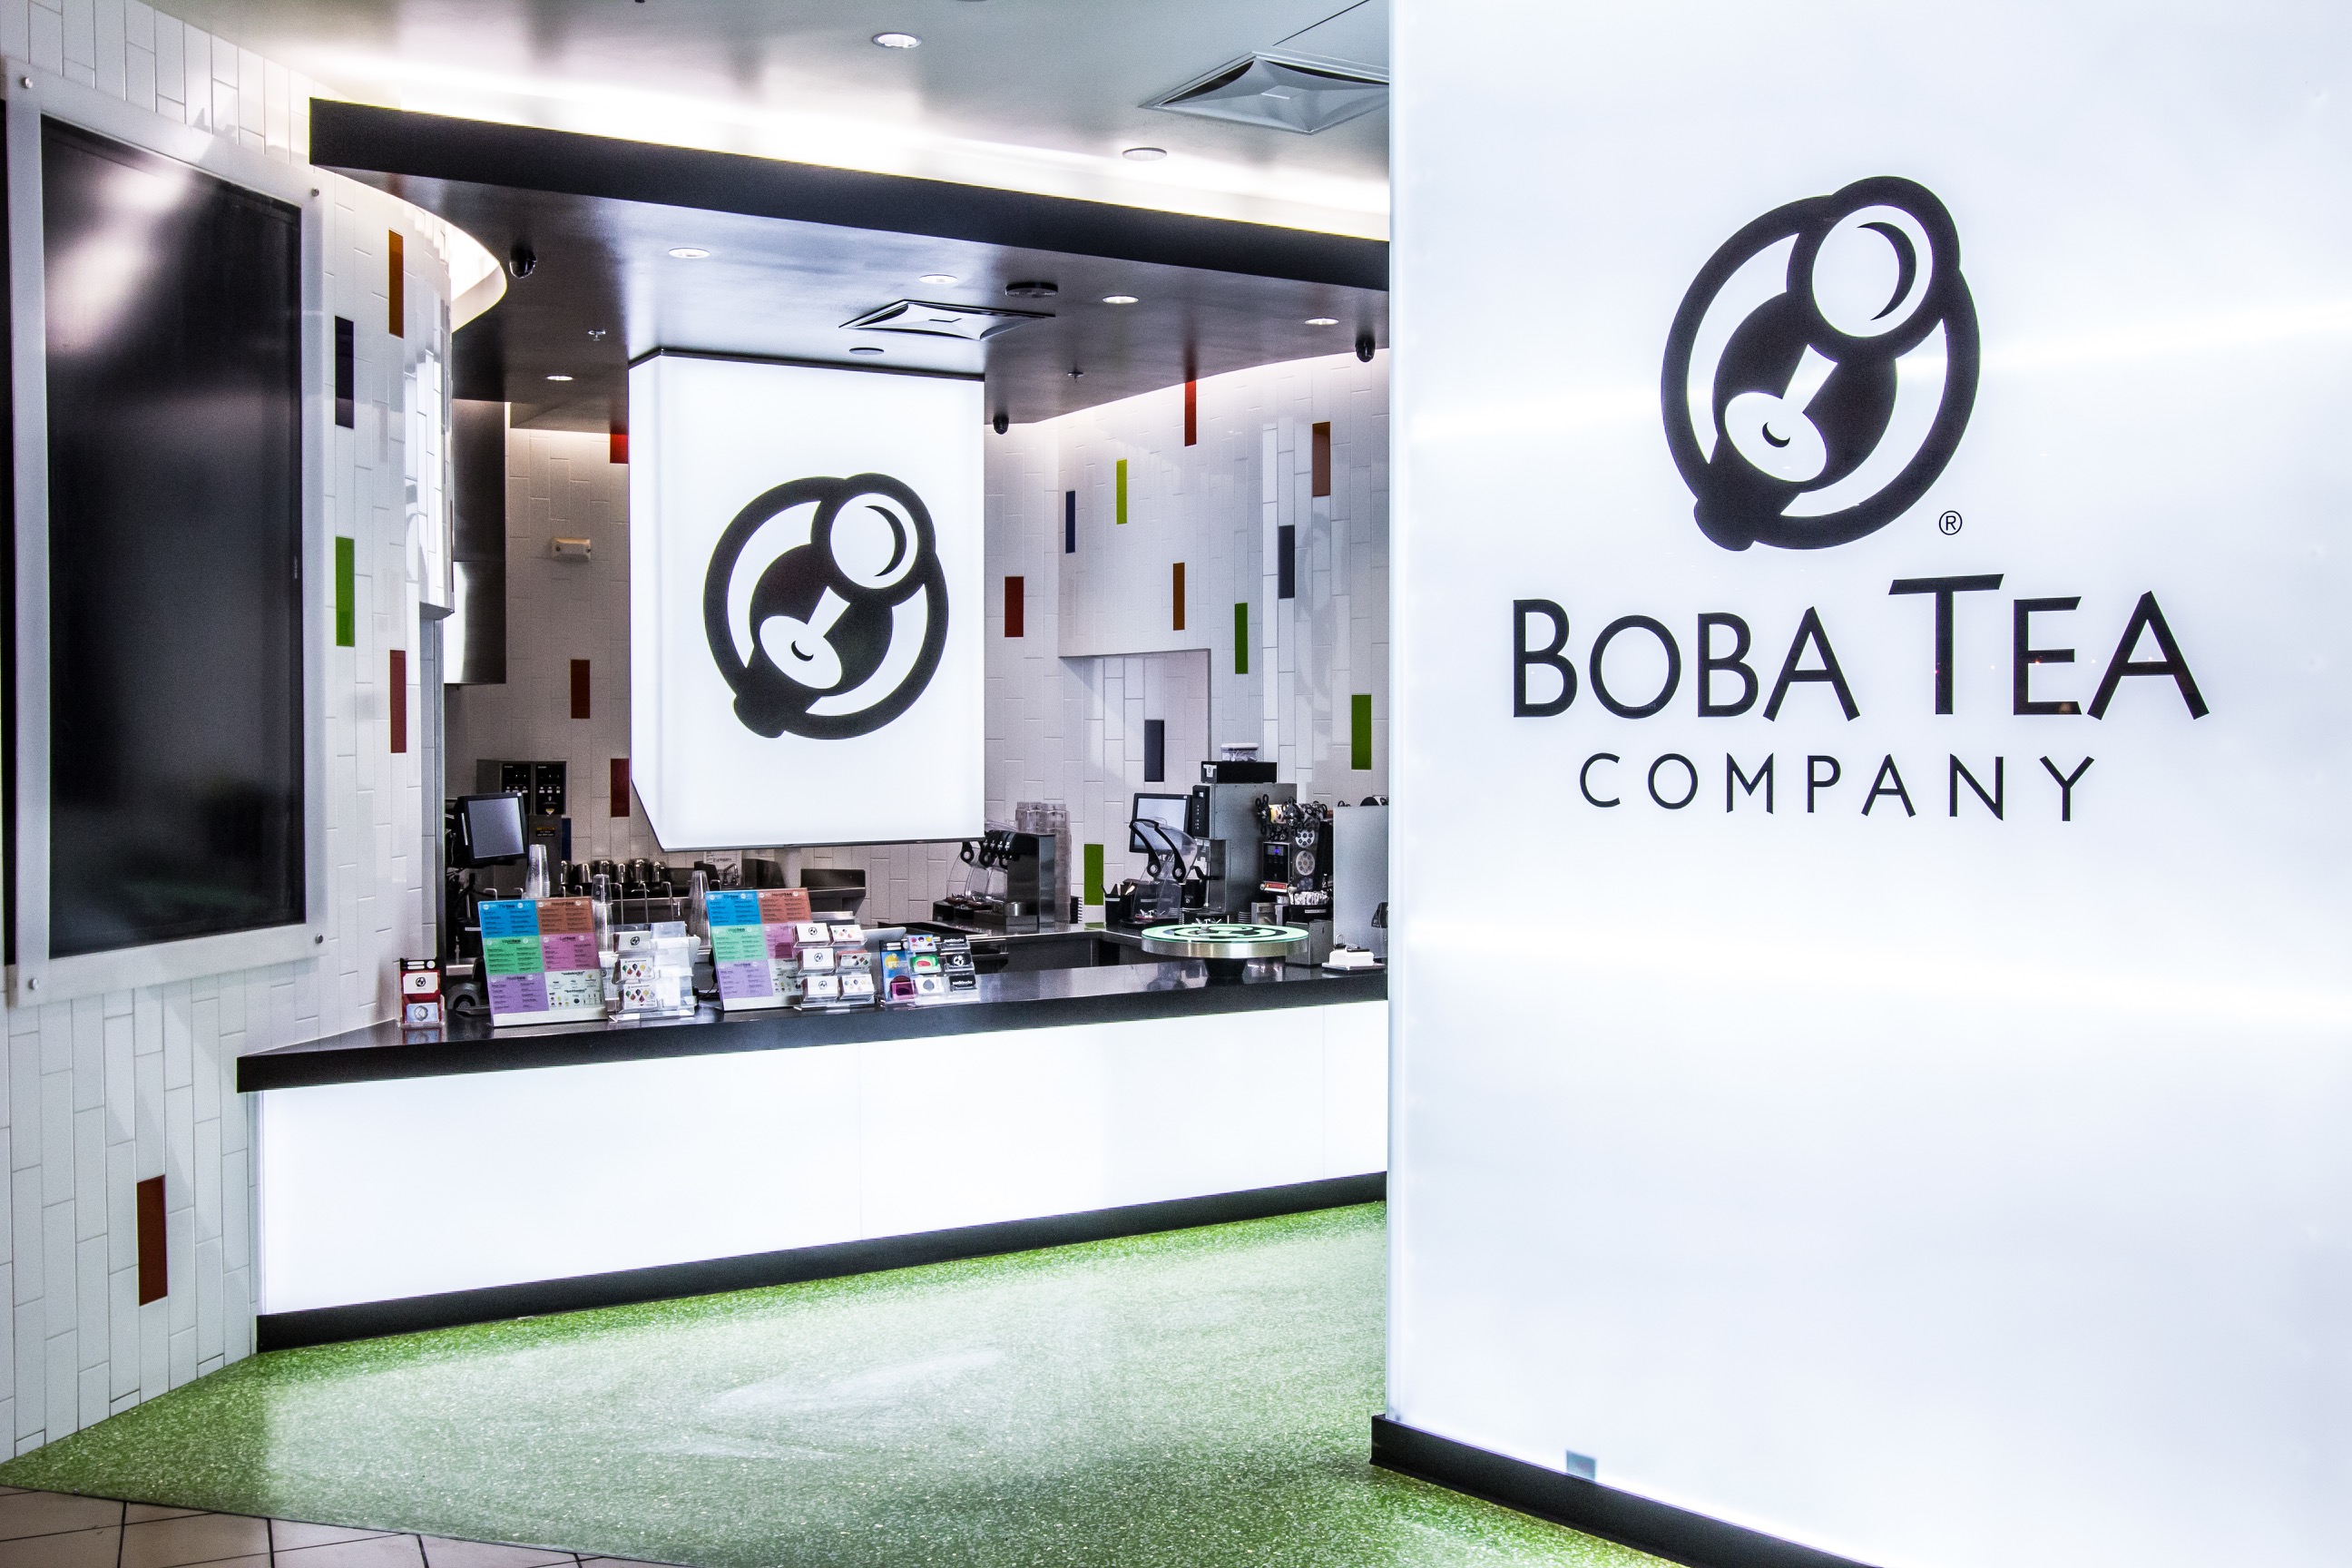 Boba Tea Company Zoom in View of the Logo